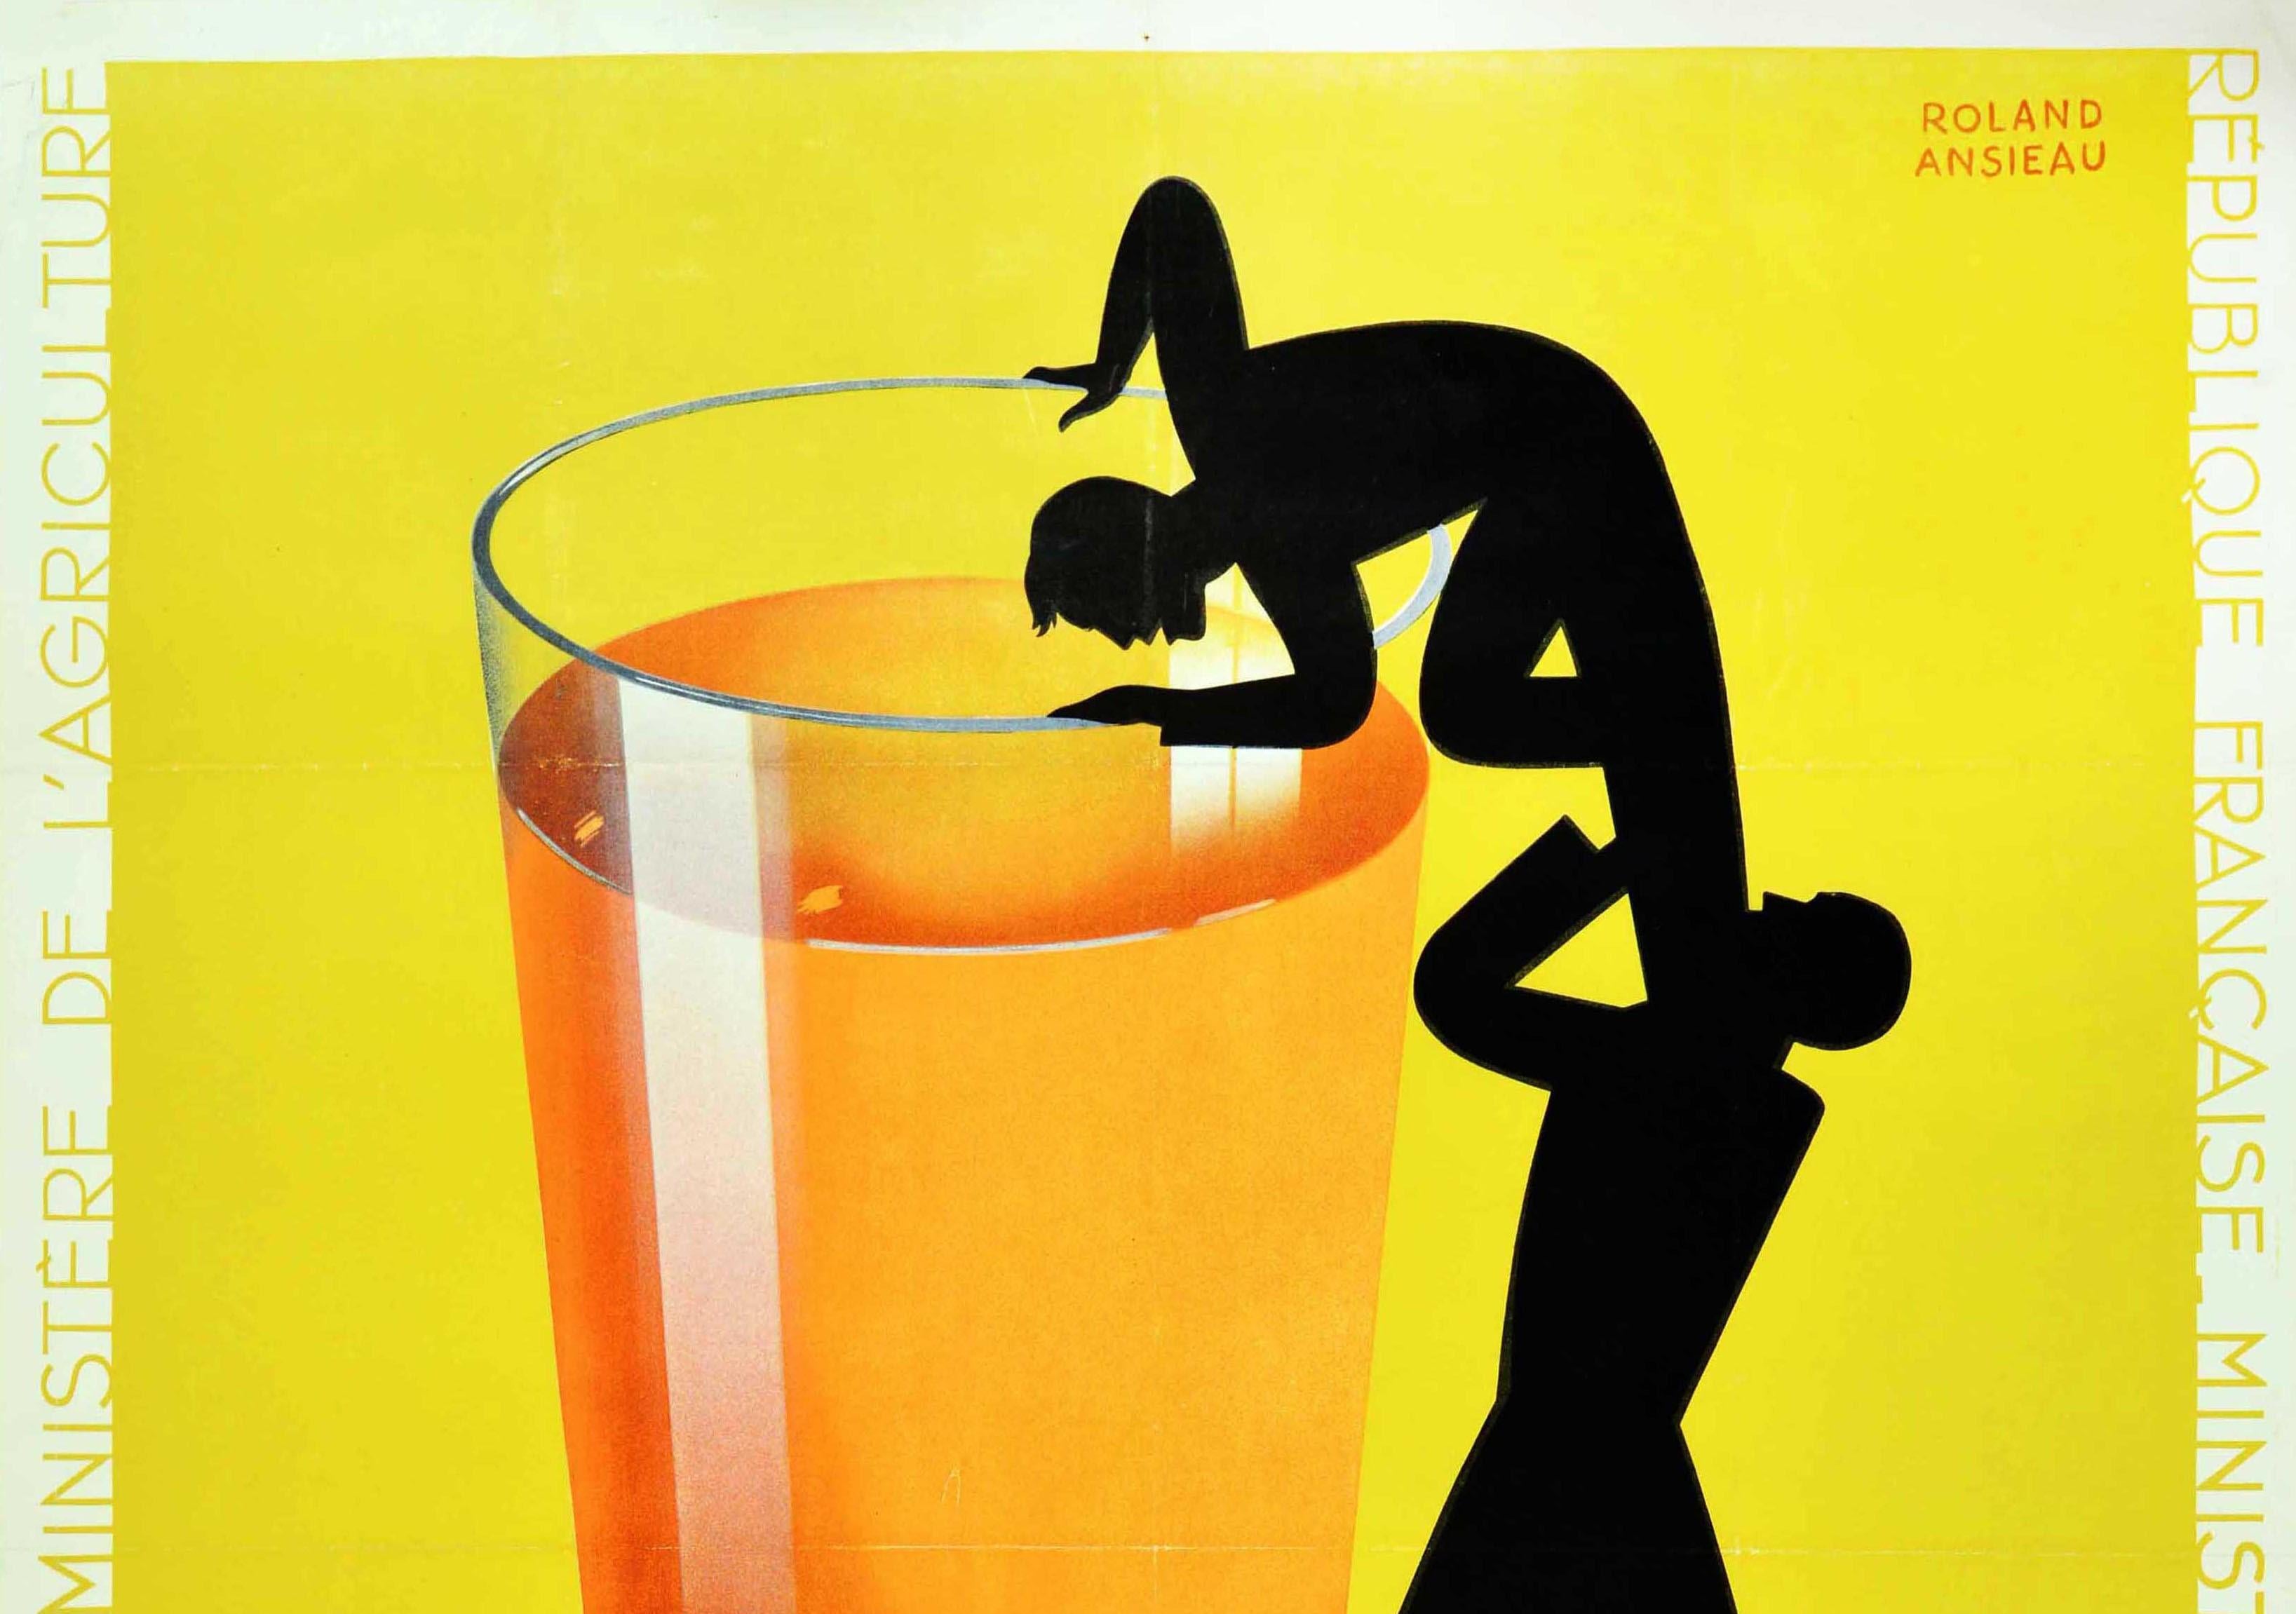 Original vintage advertising poster - Buvez Du Cidre Vous Vivrez Vieux - featuring a great Art Deco design by the French graphic artist Roland Ansieau (1901-1987) depicting the silhouette figures of a man holding up another man leaning over a large